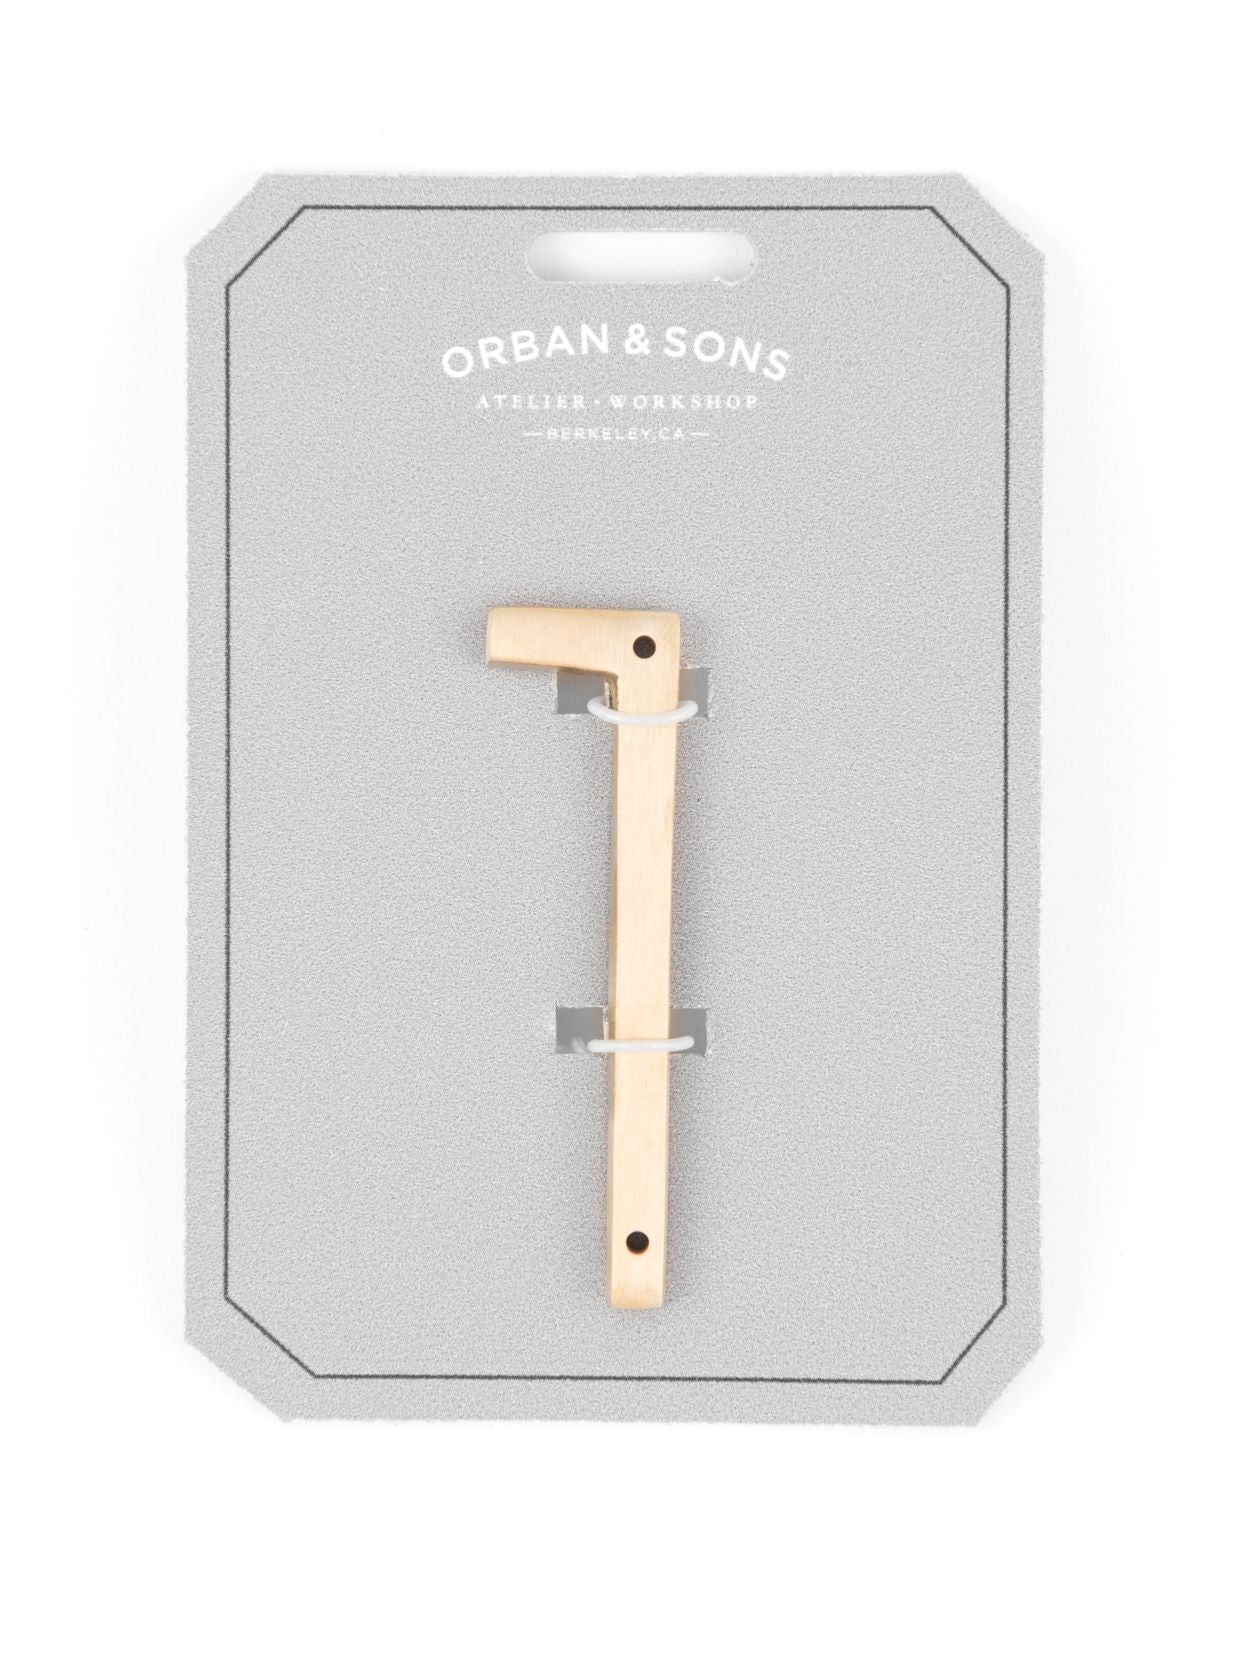 Orban & Sons Brass Numbers 1 House Numbers & Letters Orban & Sons Brand_Orban & Sons CLEAN OUT SALE Corkscrews & Tools Home_Decor KTFWHS Orban & Sons Orban_SonsBrassNumber1_2